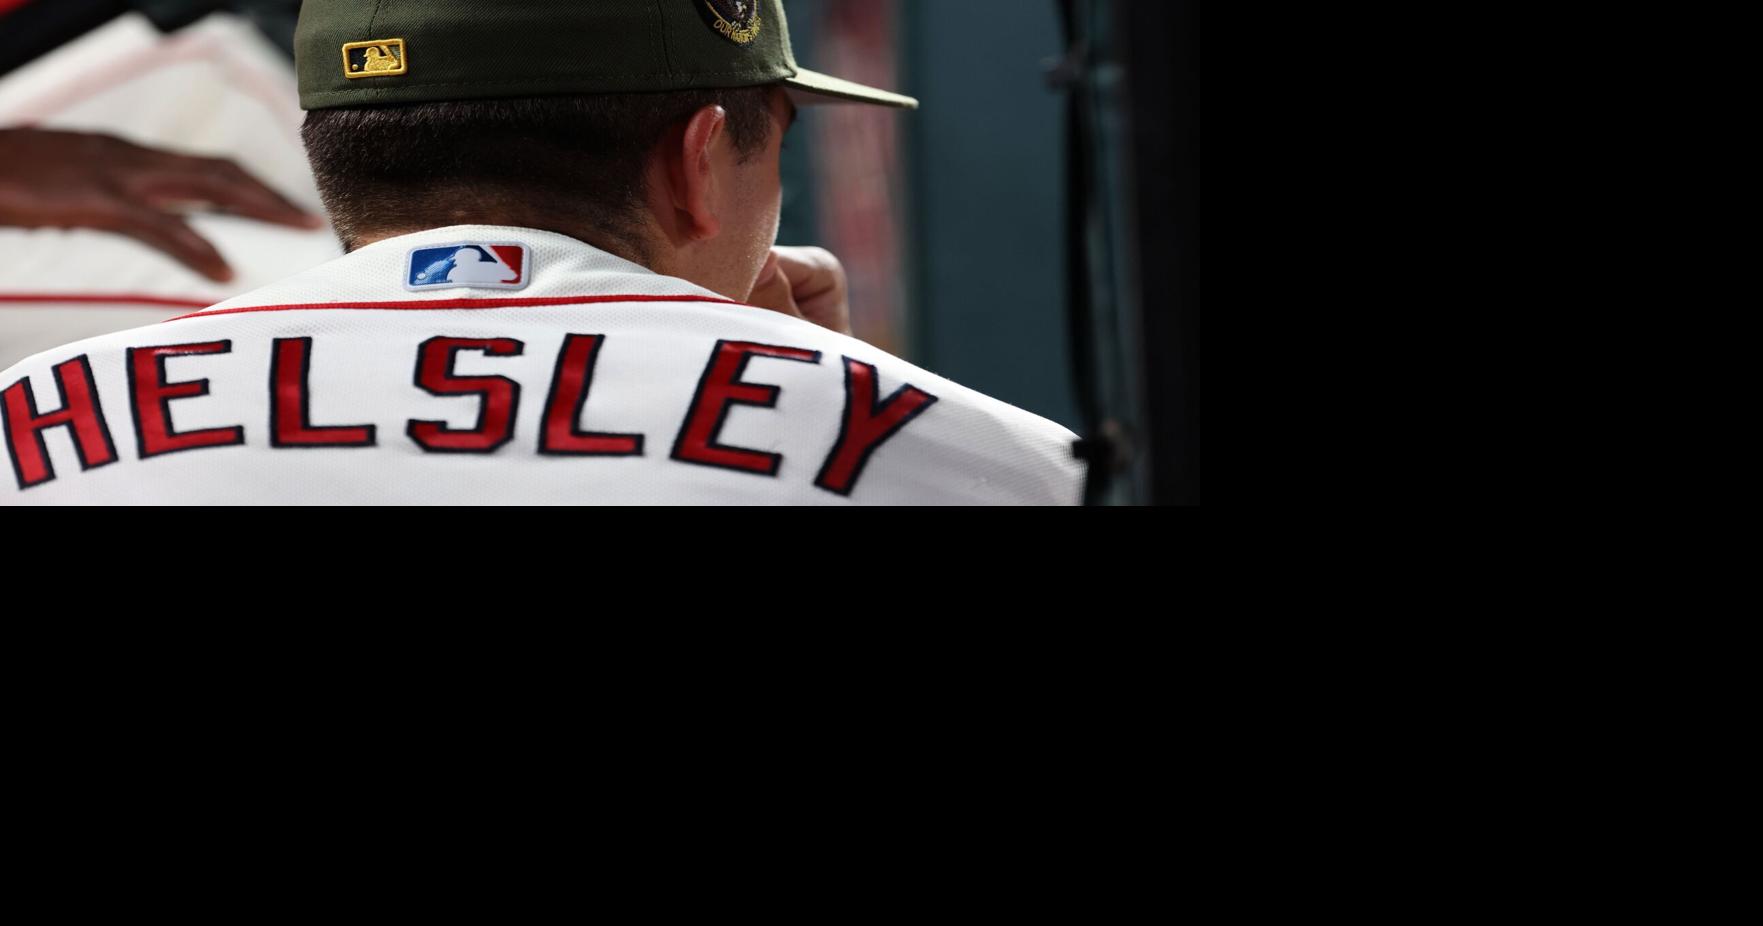 Helsley drafted by St. Louis Cardinals, News